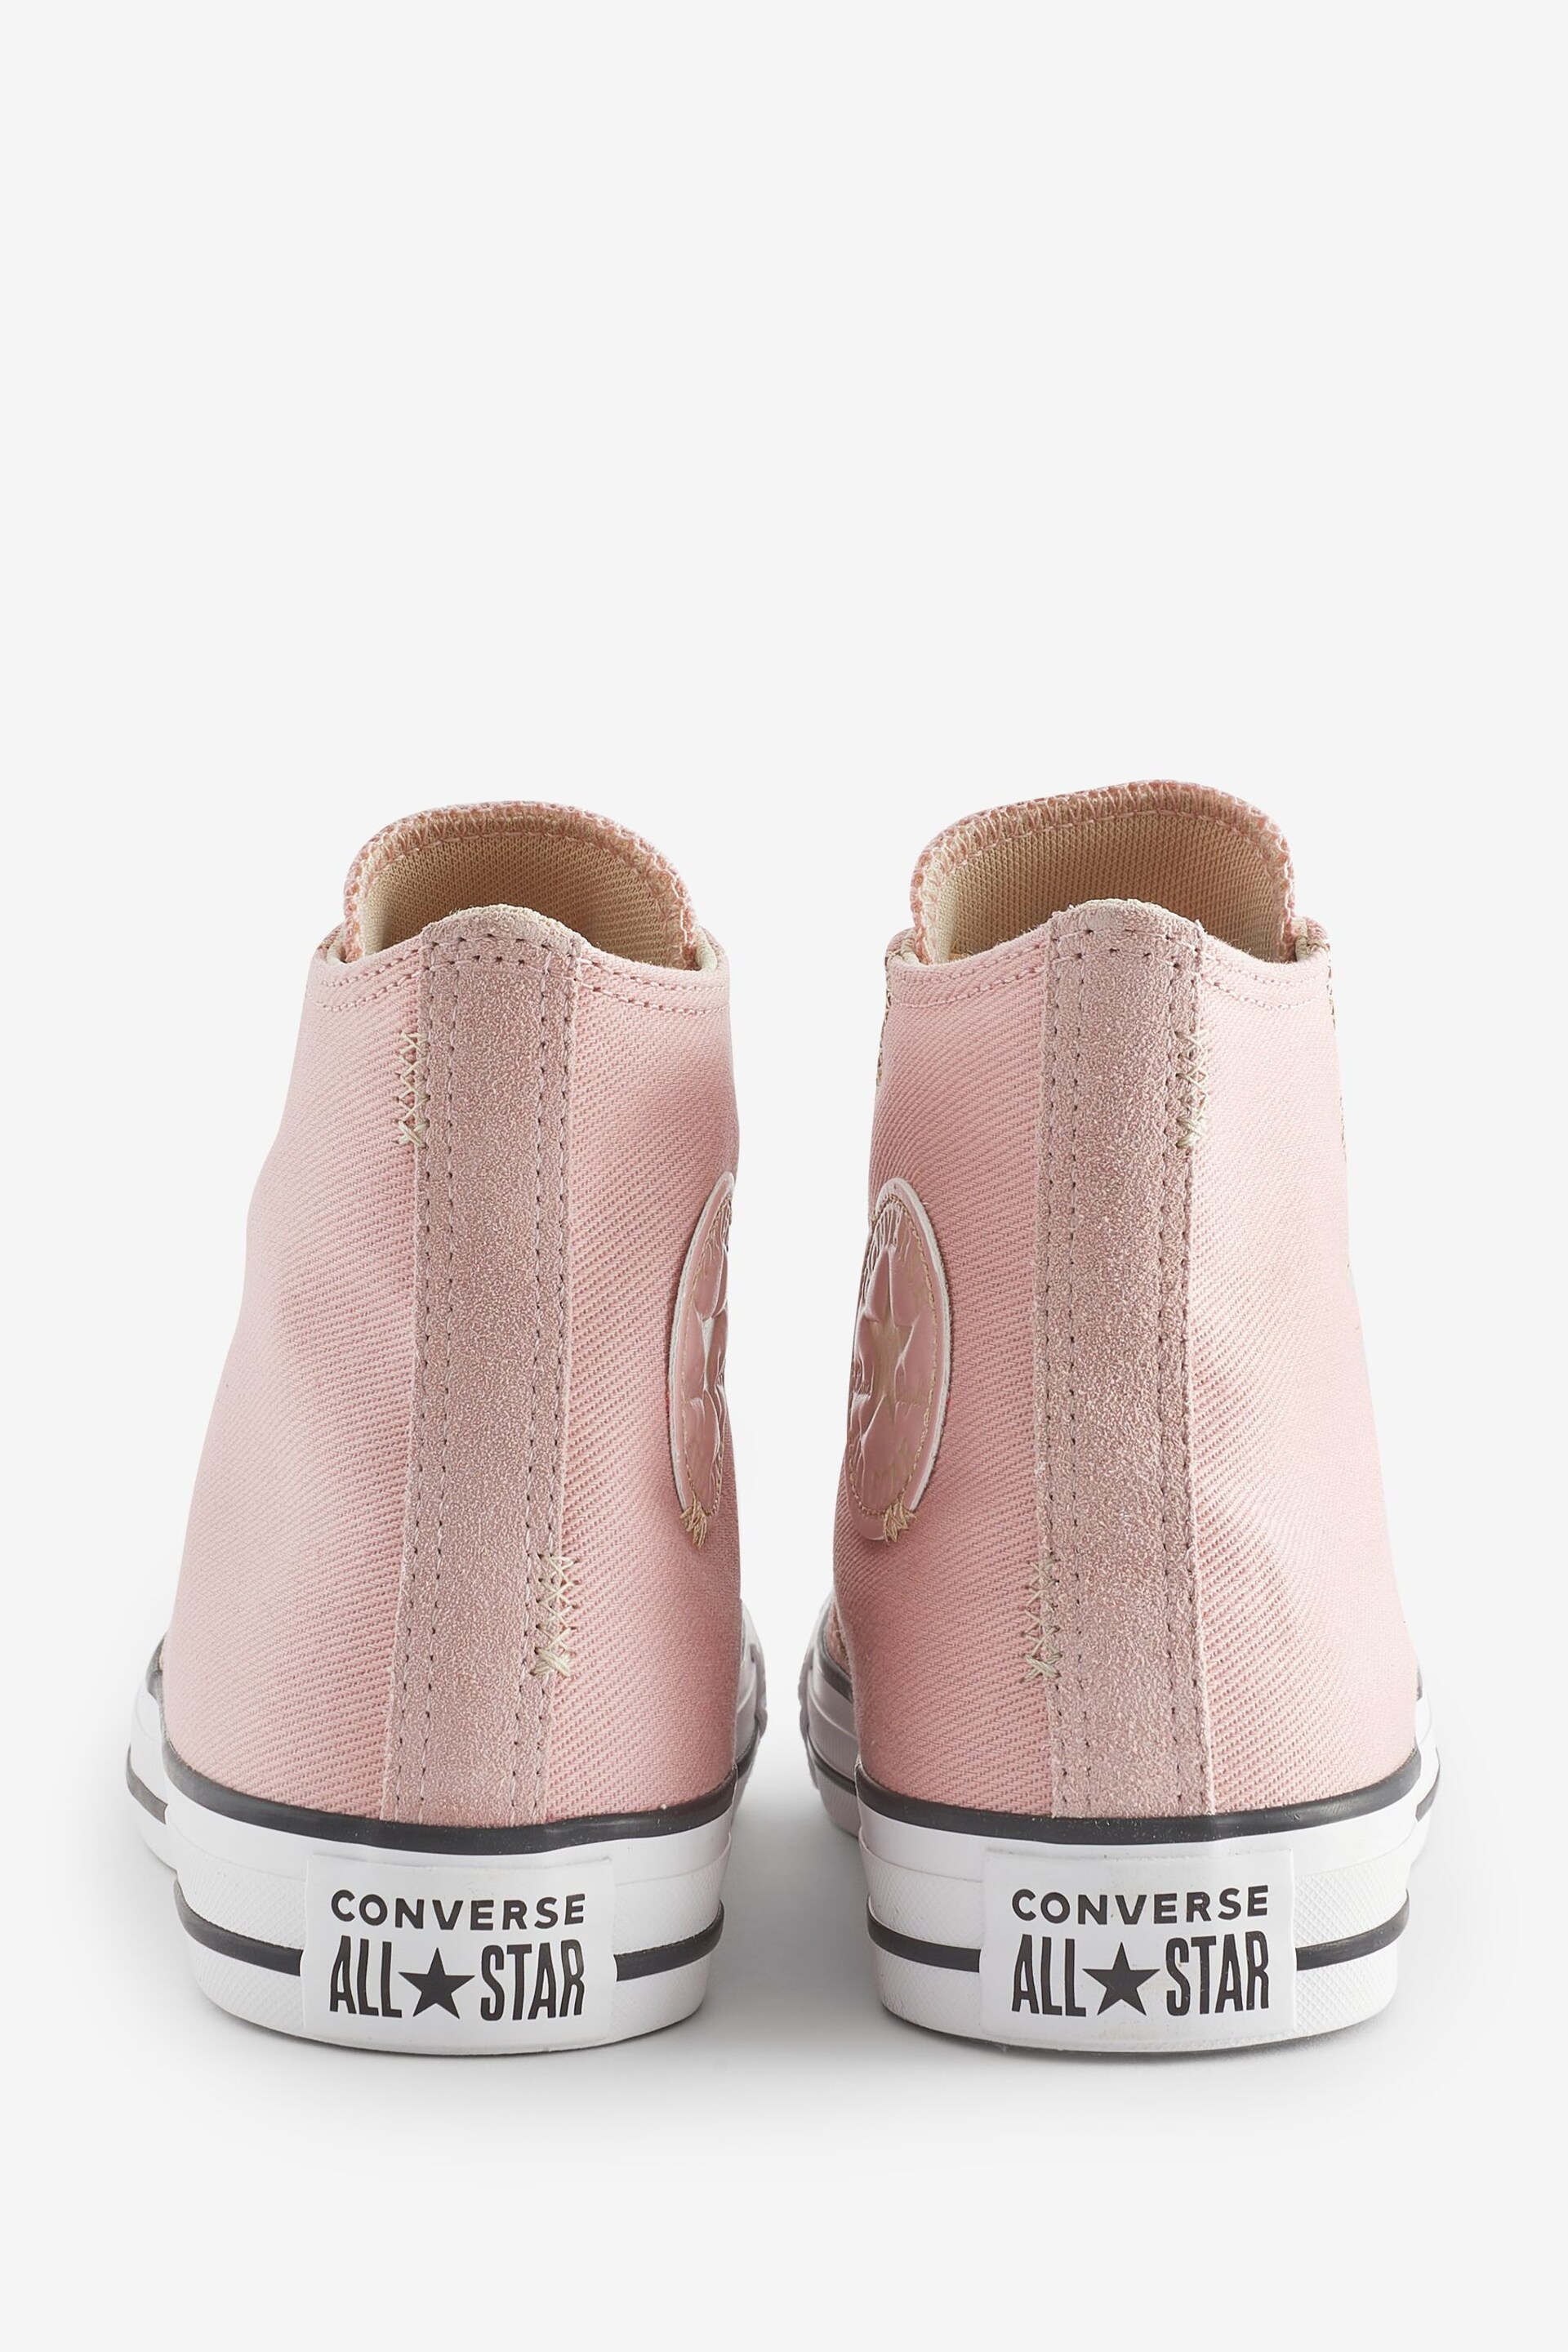 Converse Pink/White Chuck Taylor All Star High Top Trainers - Image 4 of 9